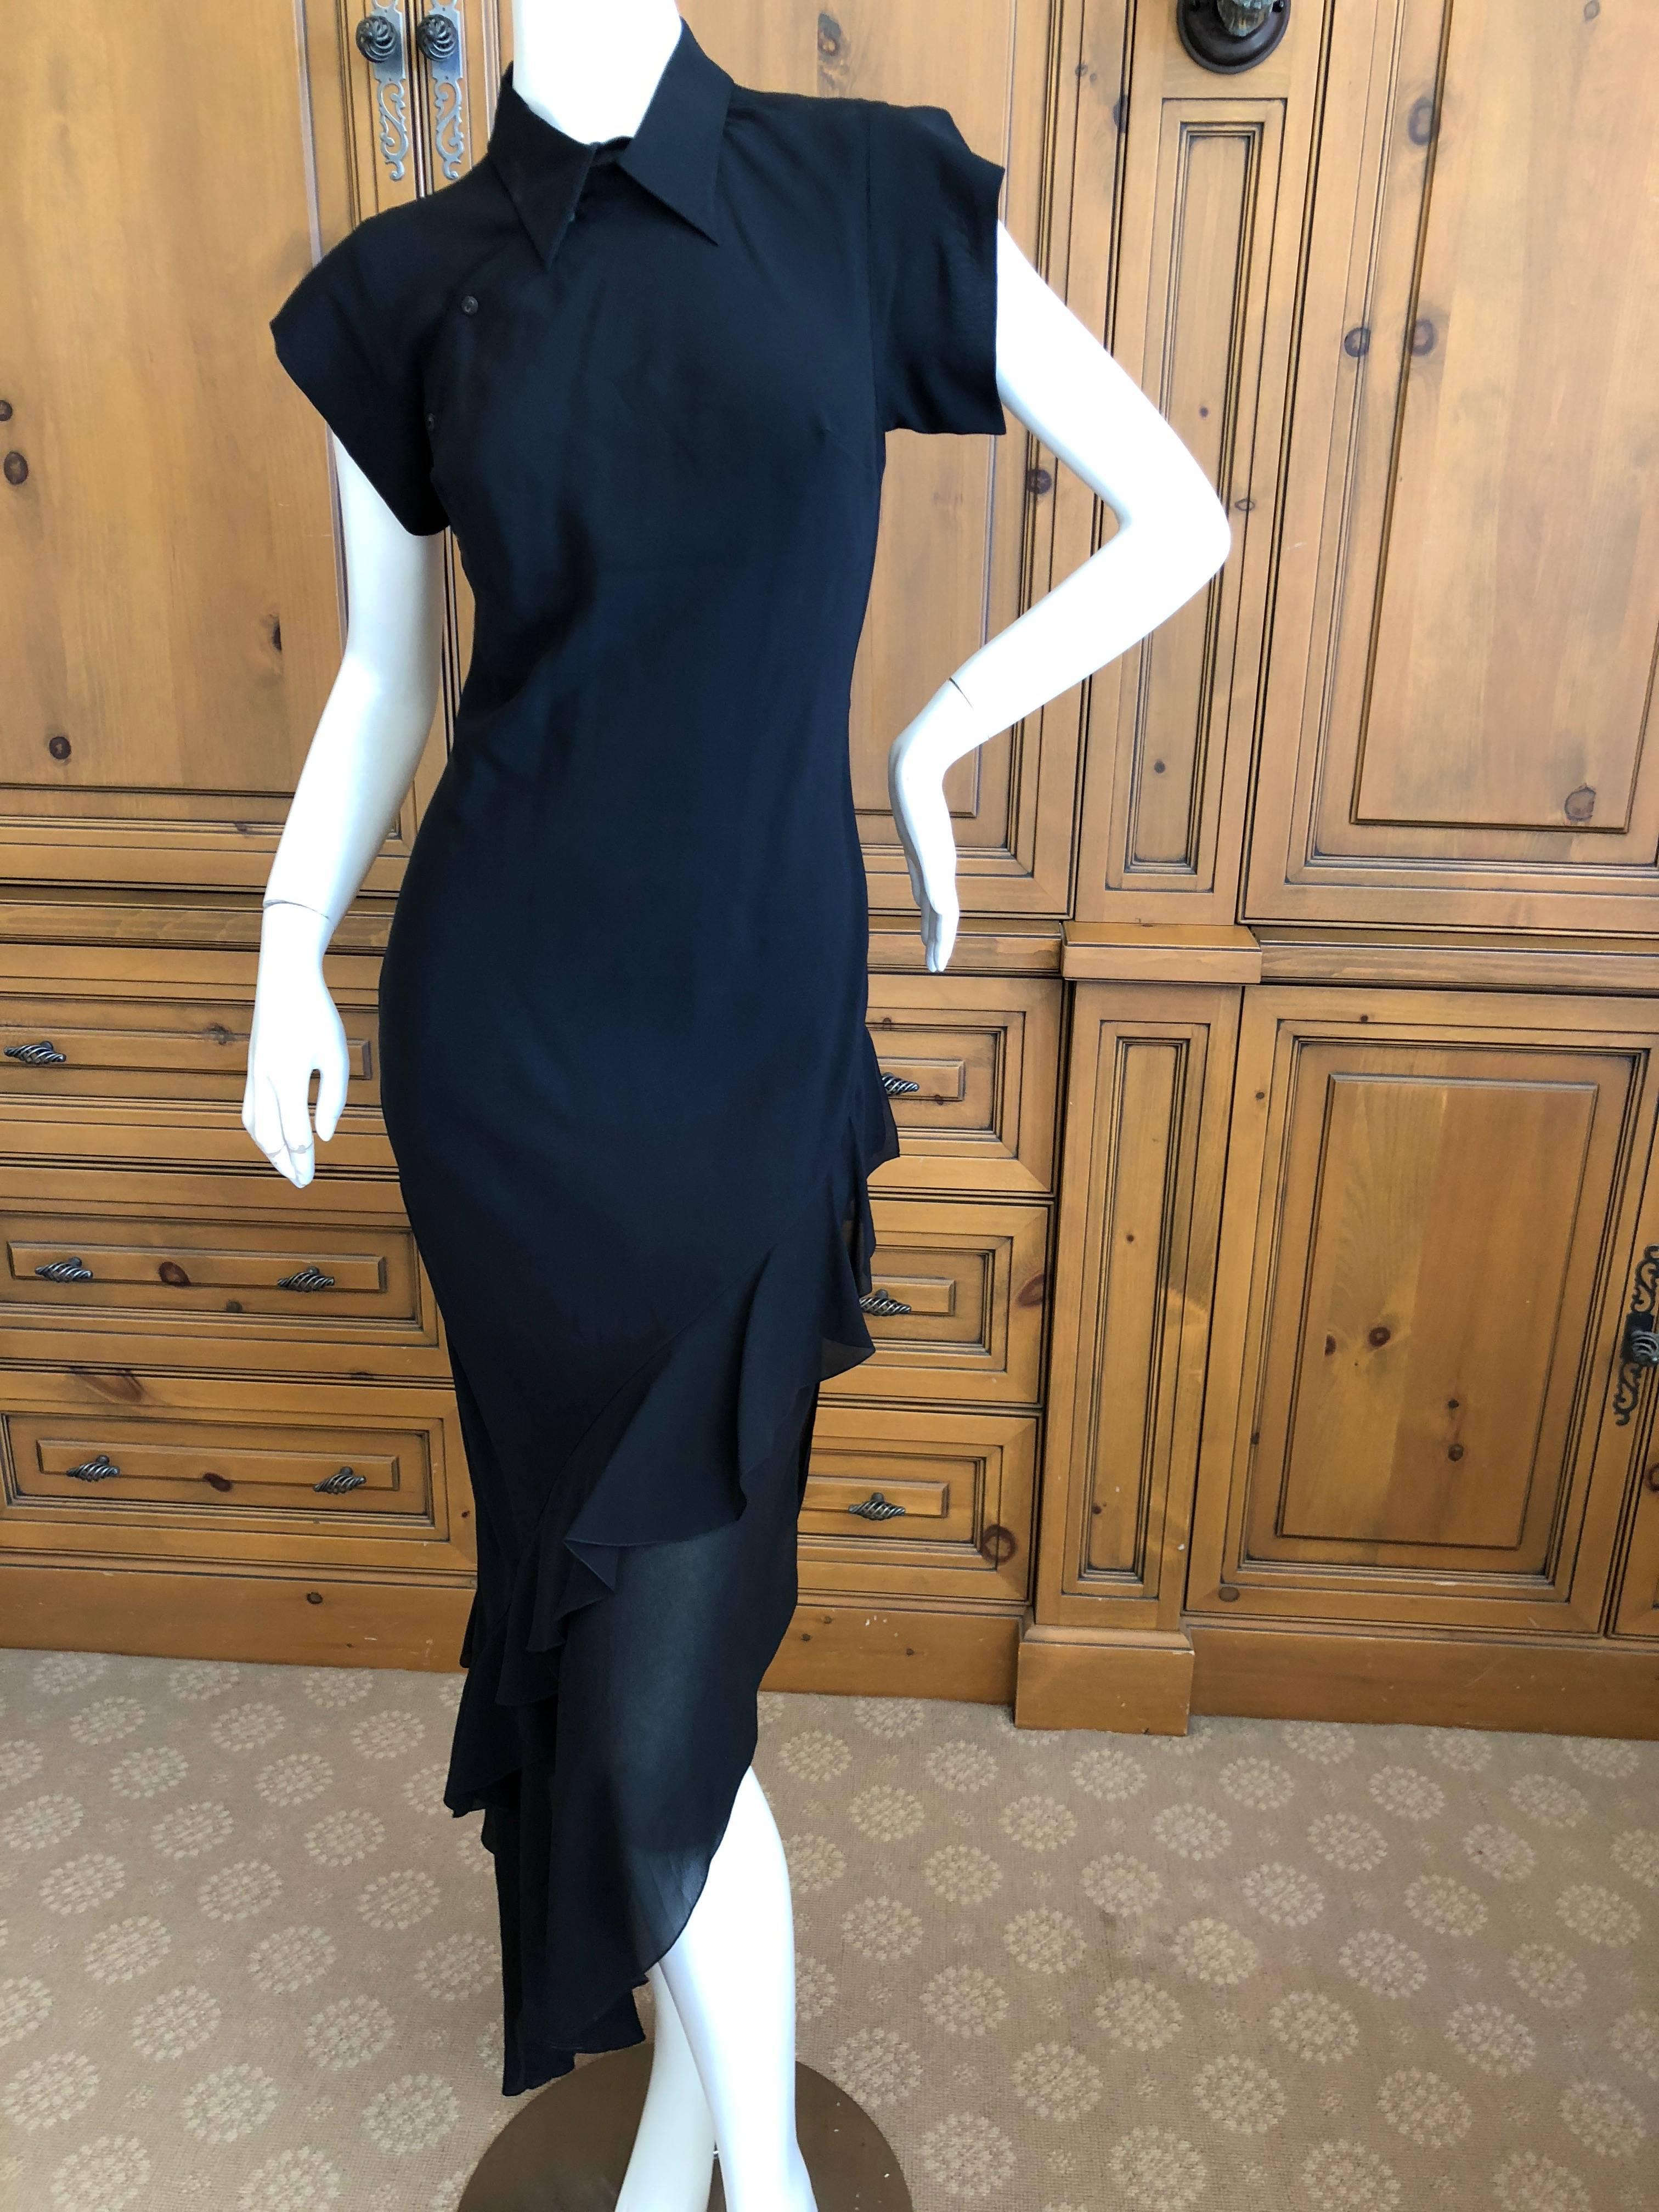 John Galliano Vintage Black Silk Cheongsam Style Evening Dress.
Asymmetrical hemline, long on one side, shorter with a slit on the other. 
Size 38

Please use zoom feature to see, it is hard to photograph, but so pretty.

Bust 38